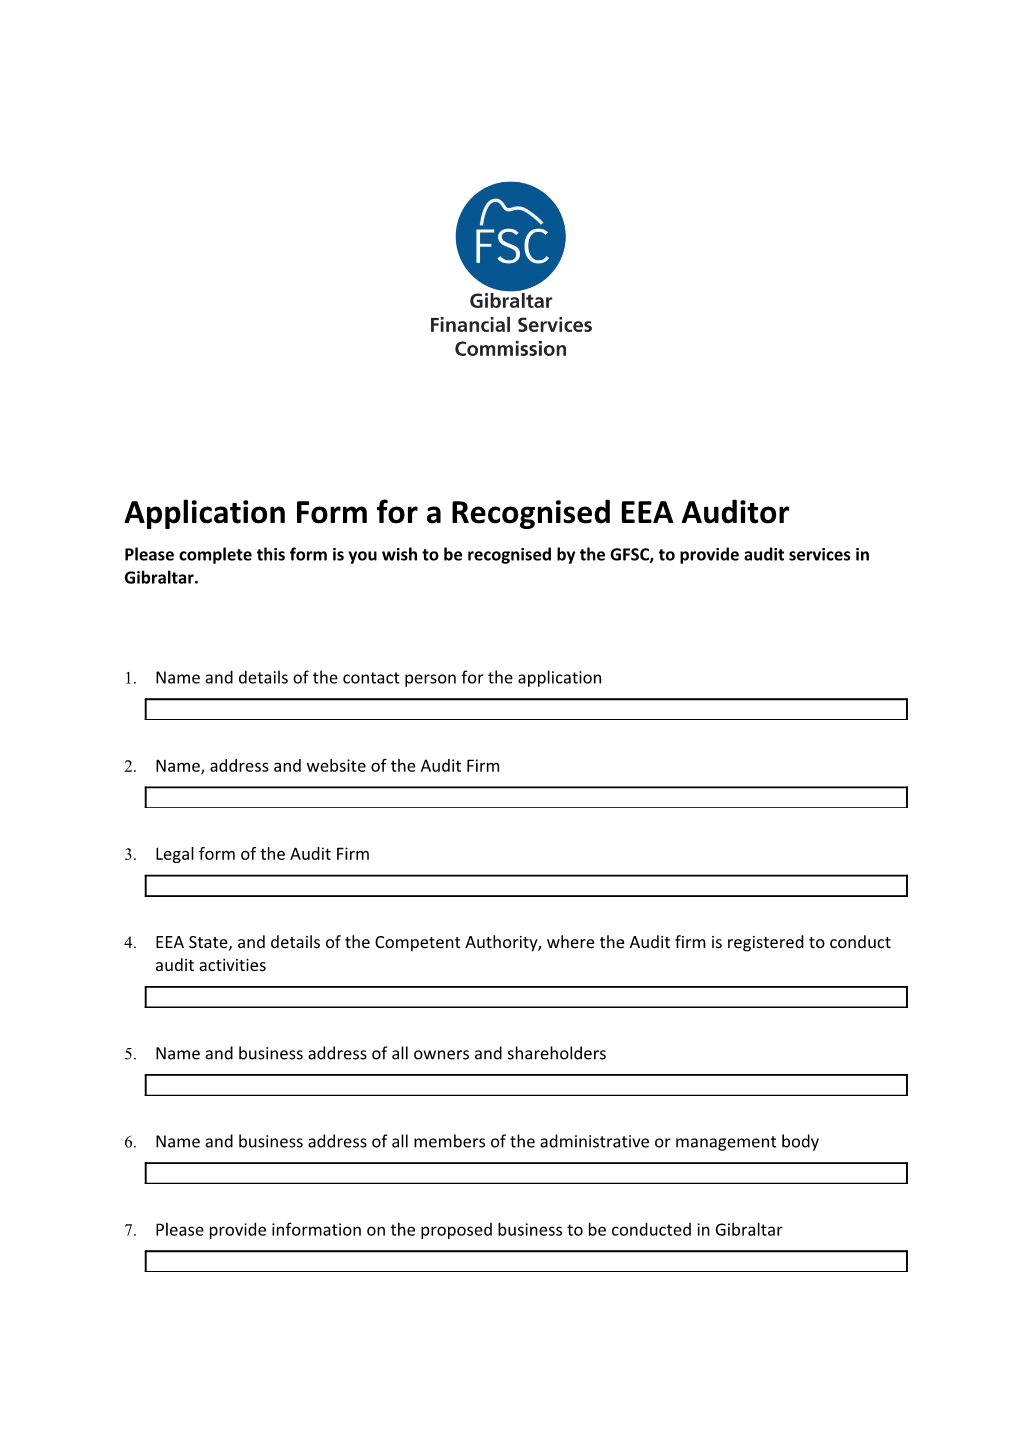 Application Form for a Recognised EEA Auditor